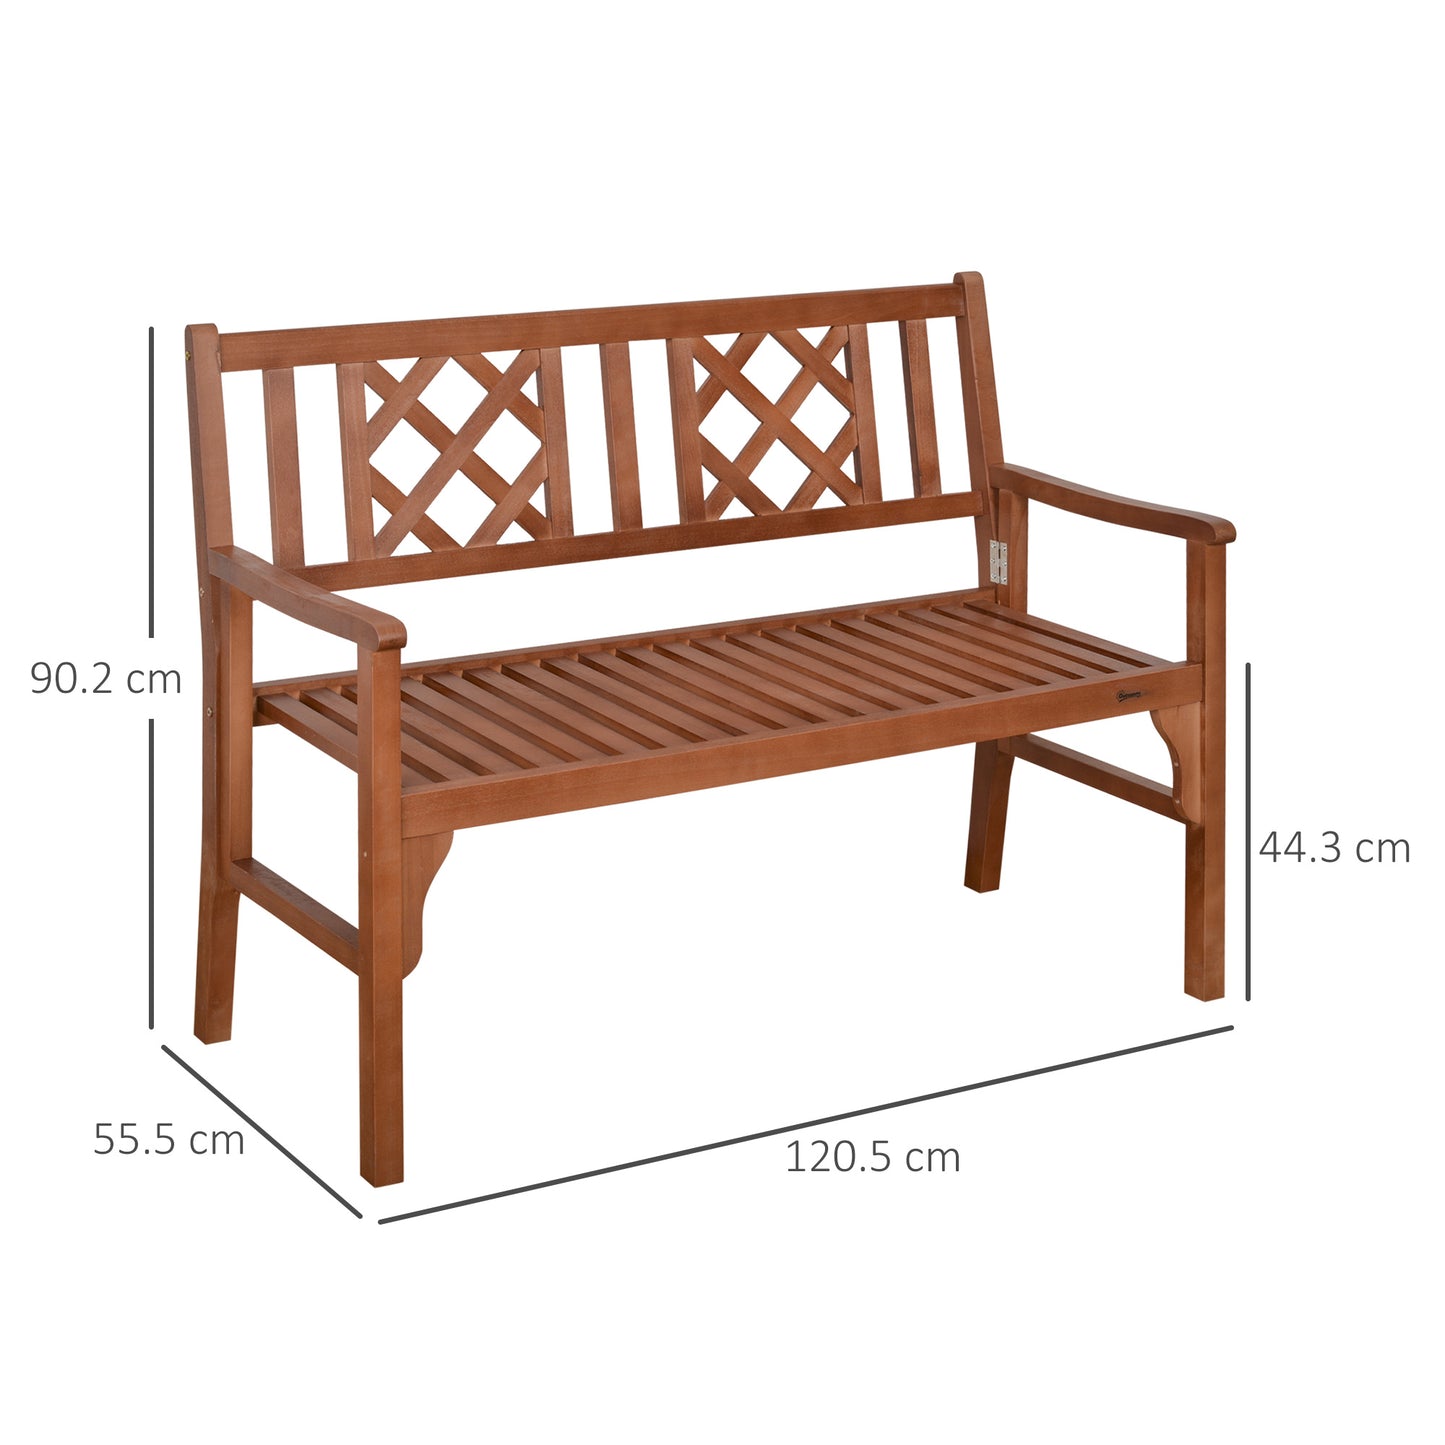 Outsunny Foldable Garden Bench, 2-Seater Patio Wooden Bench, Loveseat Chair with Backrest and Armrest for Patio, Porch or Balcony, Brown